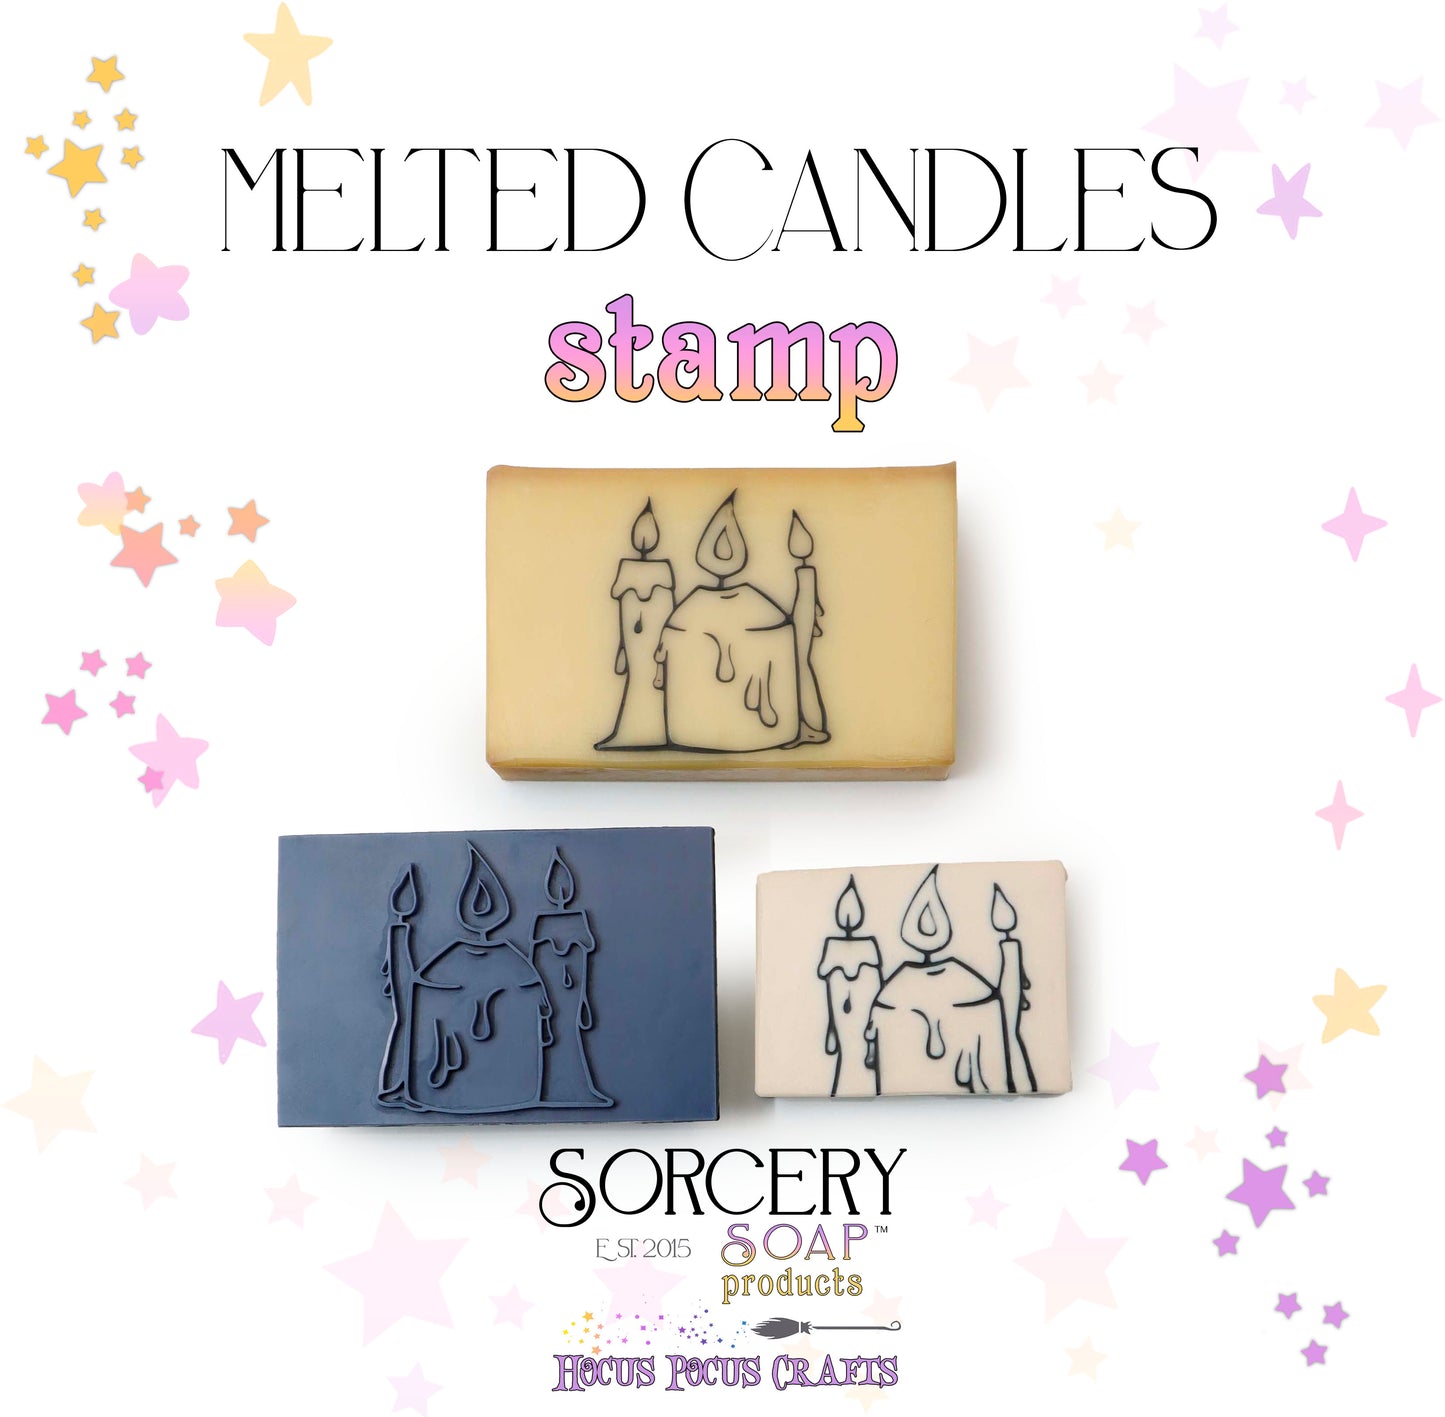 Melted Candles Stamp